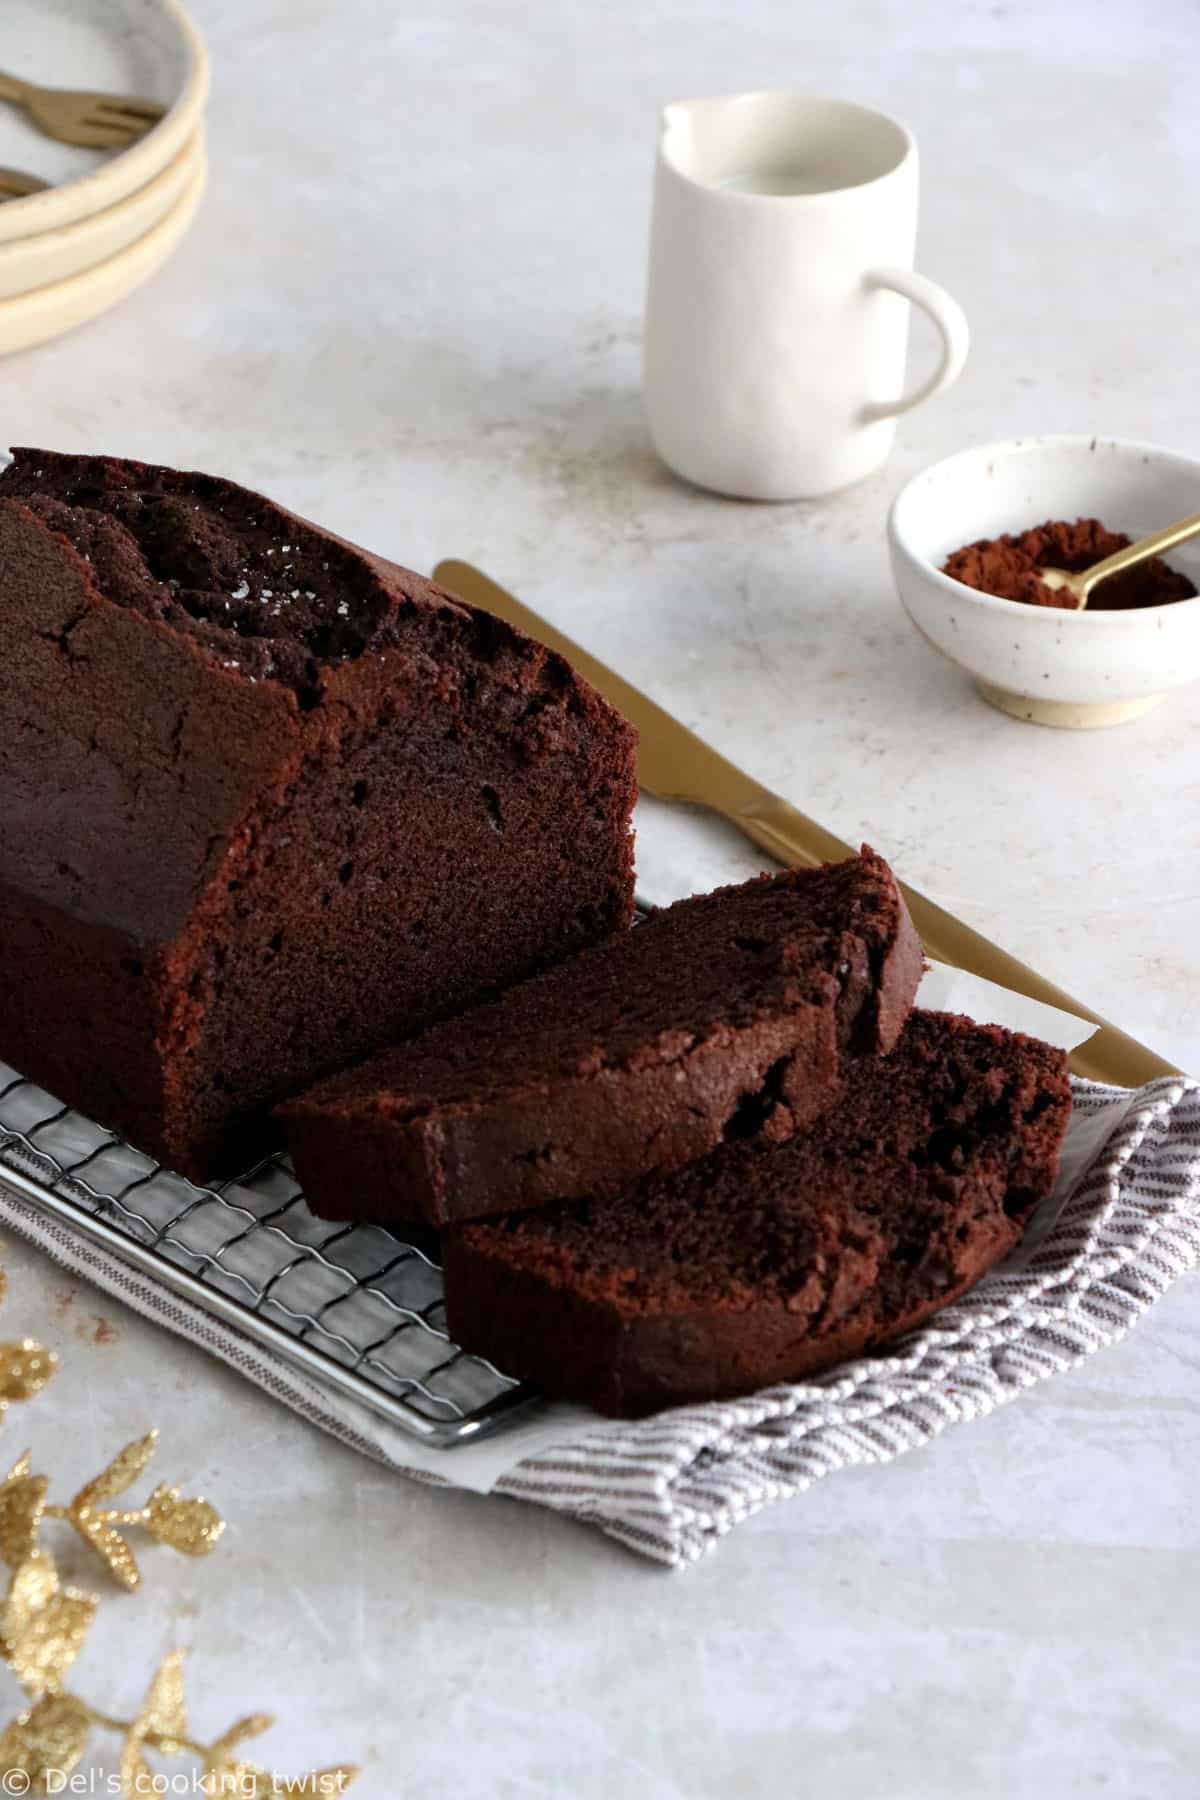 This easy chocolate pound cake recipe is full of rich chocolate flavors, perfectly moist, and simply delicious.